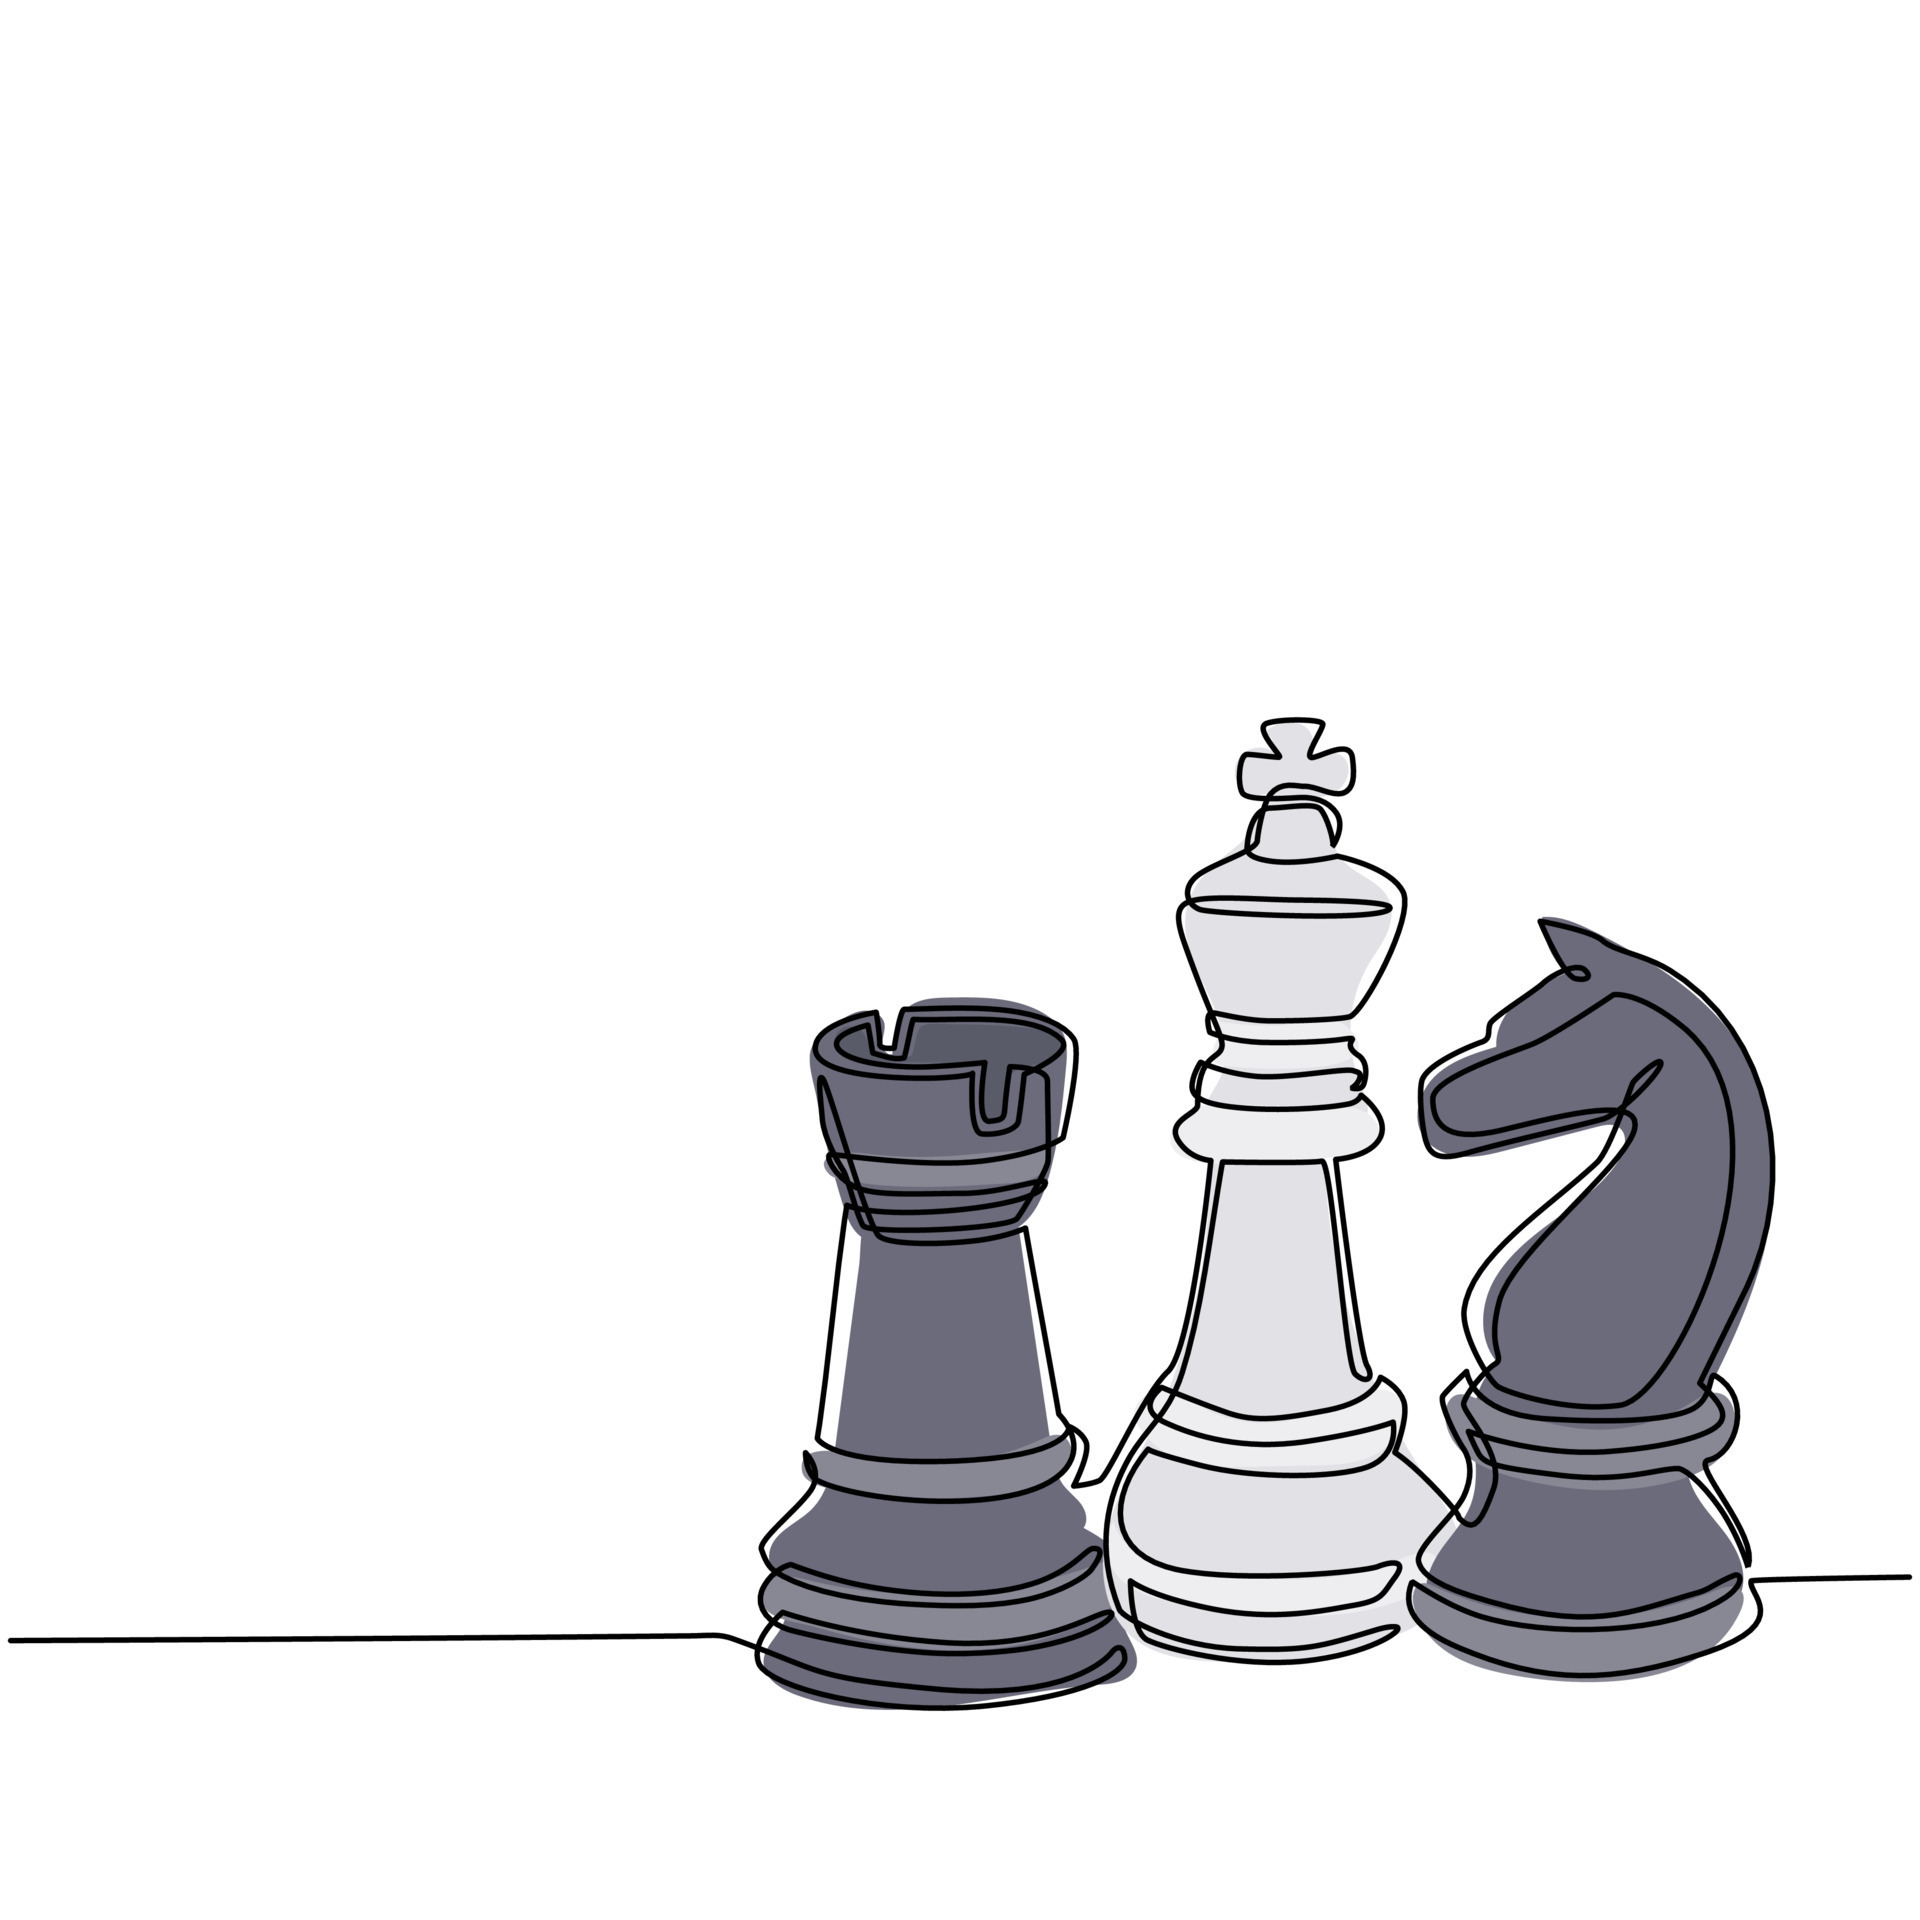 Single one line drawing chess pieces aligned Vector Image